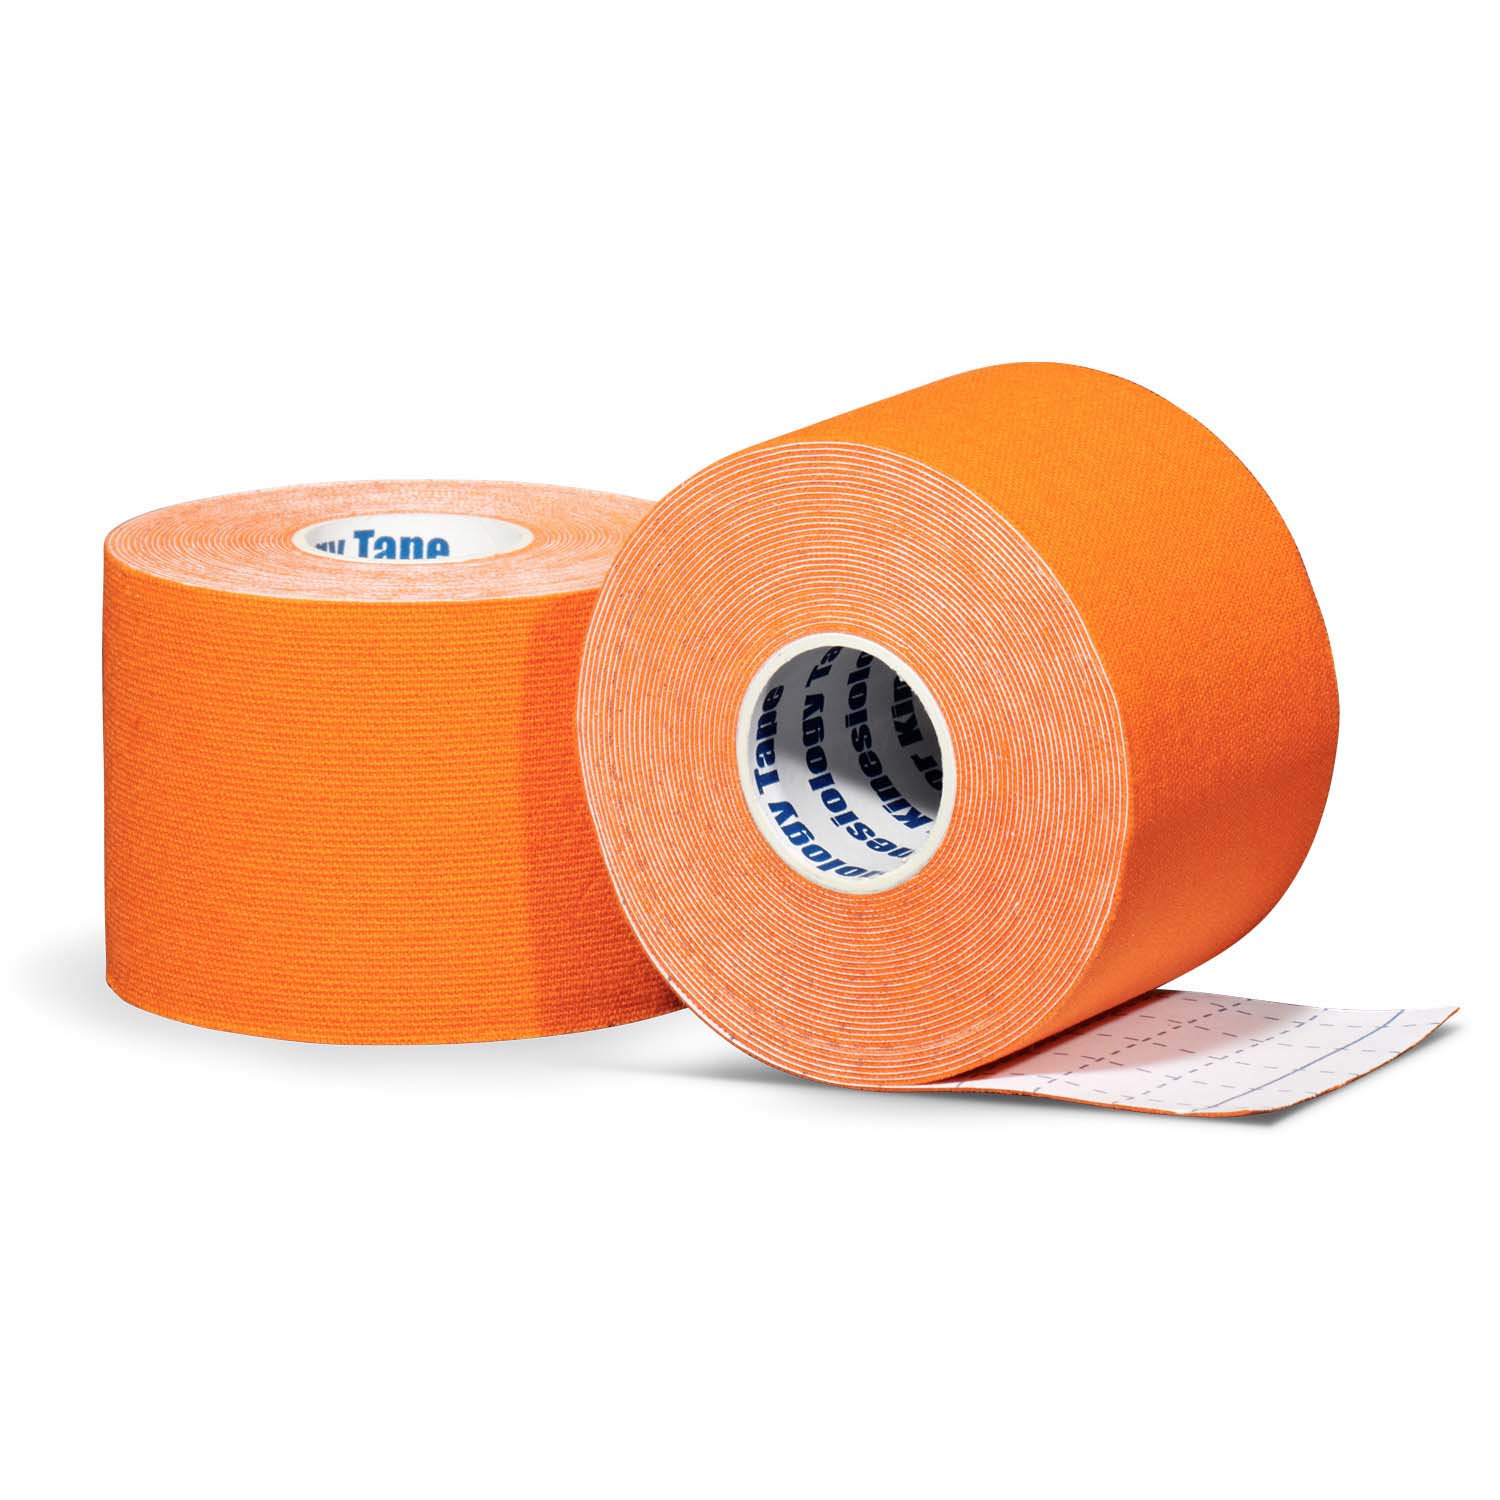 Kinesiology tape per roll orange front and back view